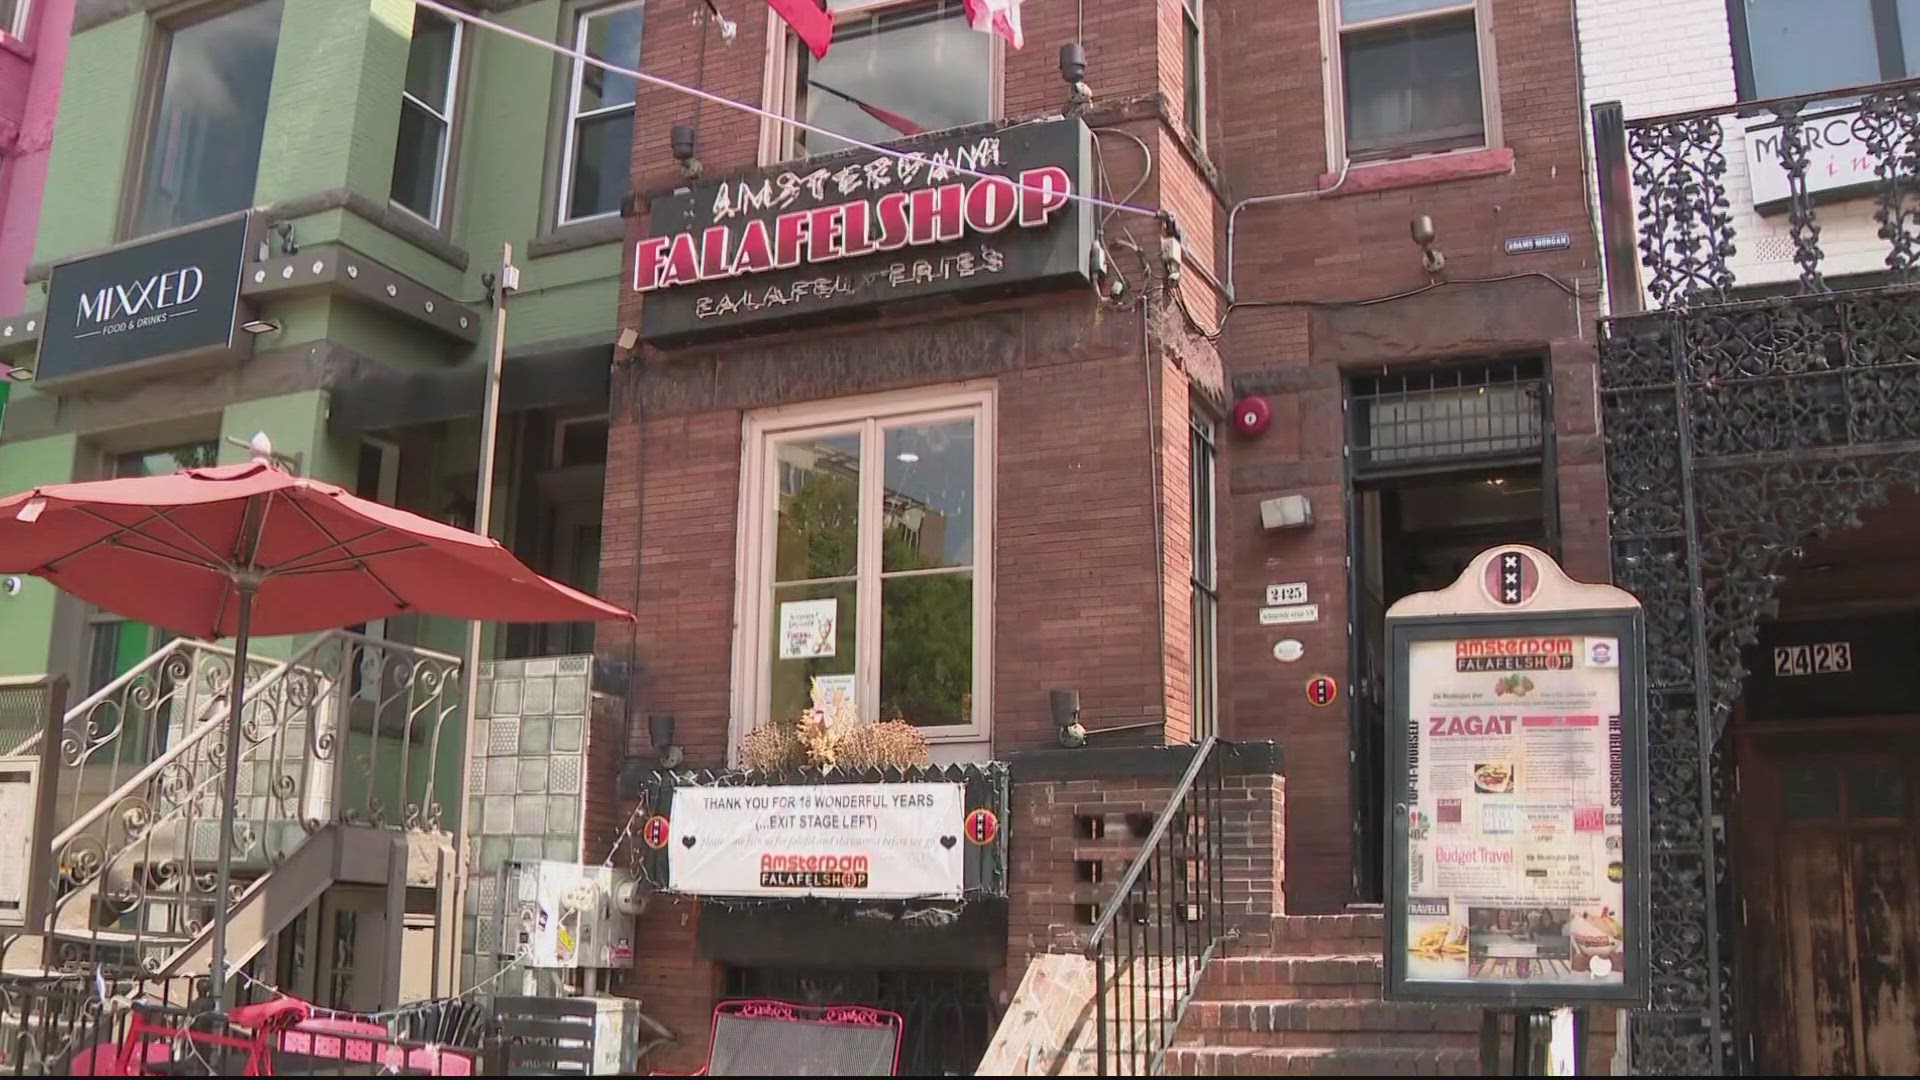 Amsterdam Falafelshop, a beloved restaurant in the Adams Morgan neighborhood, that has been open for nearly two decades, will be closing by the end of May.